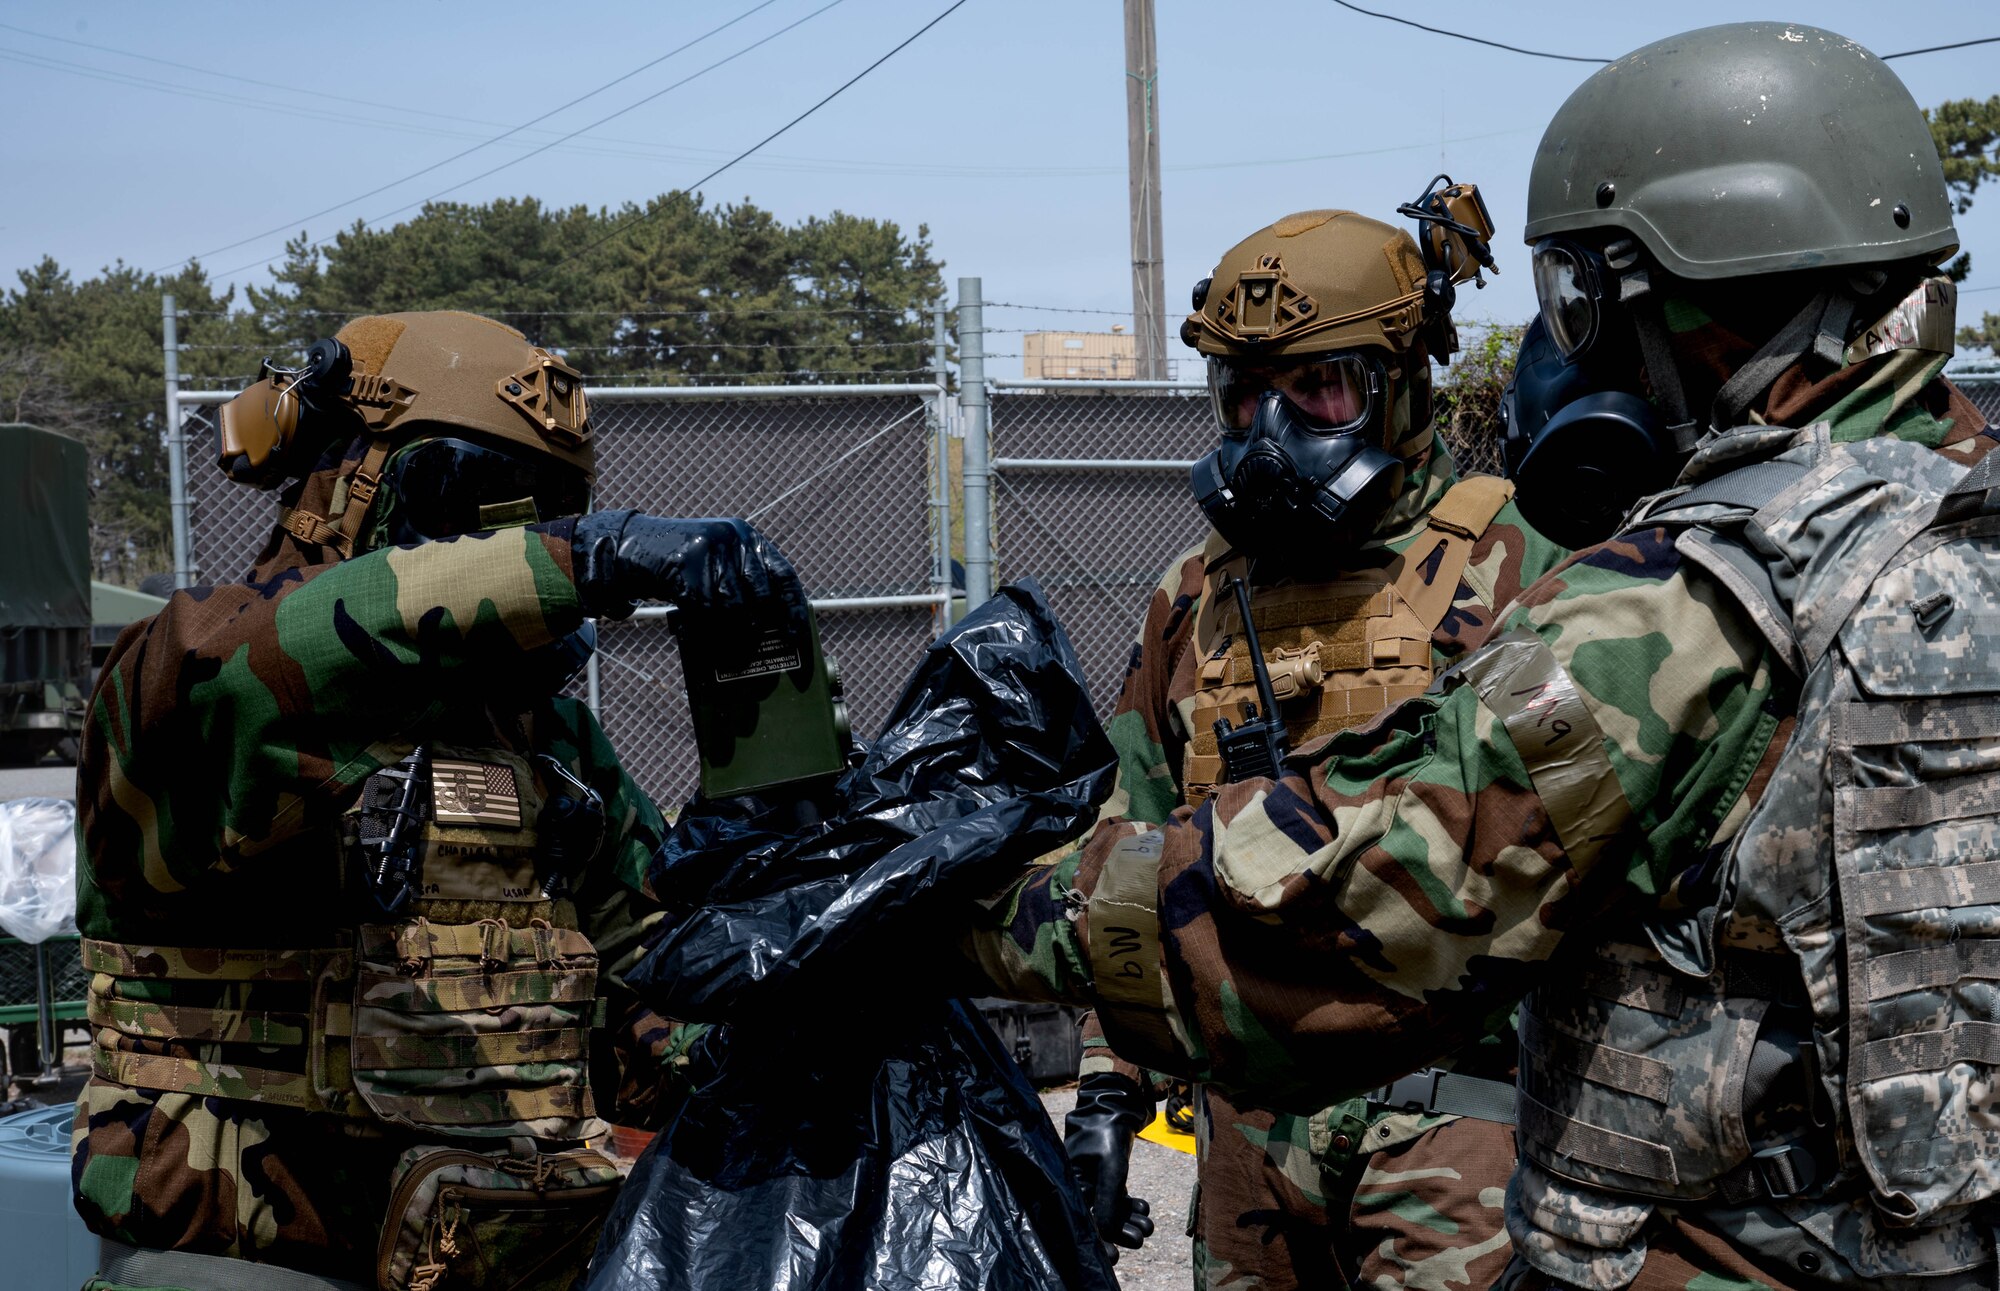 Senior Airman Charles James (left), 8th Civil Engineer Squadron explosive ordnance disposal technician, utilizes a joint chemical agent detector during a training event at Kunsan Air Base, Republic of Korea, April 20, 2023. A JCAD is used to detect the presence of chemical warfare agents and toxic industrial vapors. (U.S. Air Force photo illustration by Senior Airman Shannon Braaten)